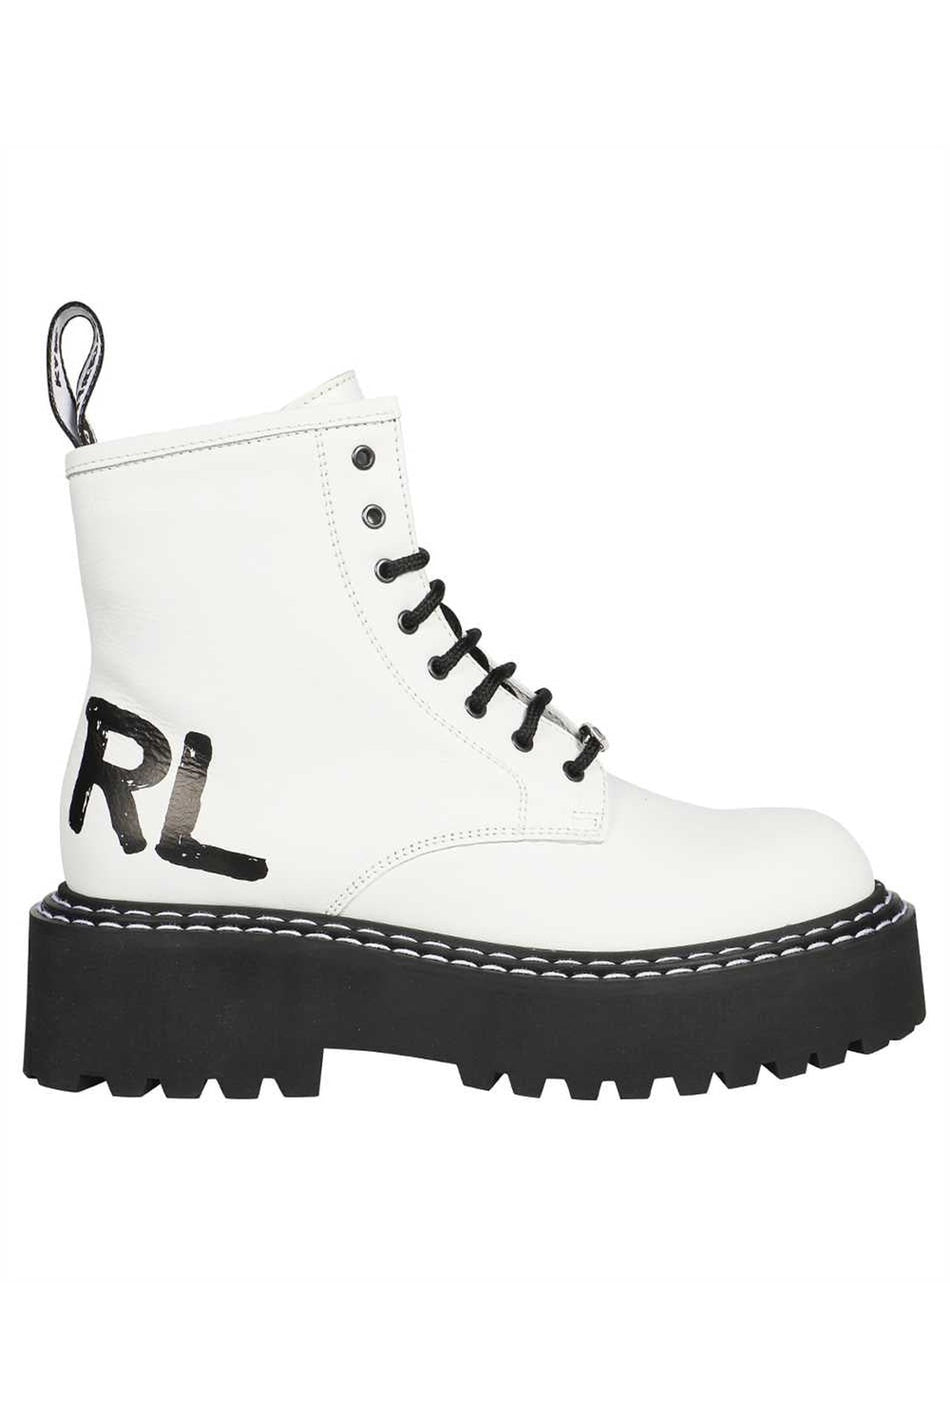 Lace-up ankle boots-Karl Lagerfeld-OUTLET-SALE-35-ARCHIVIST